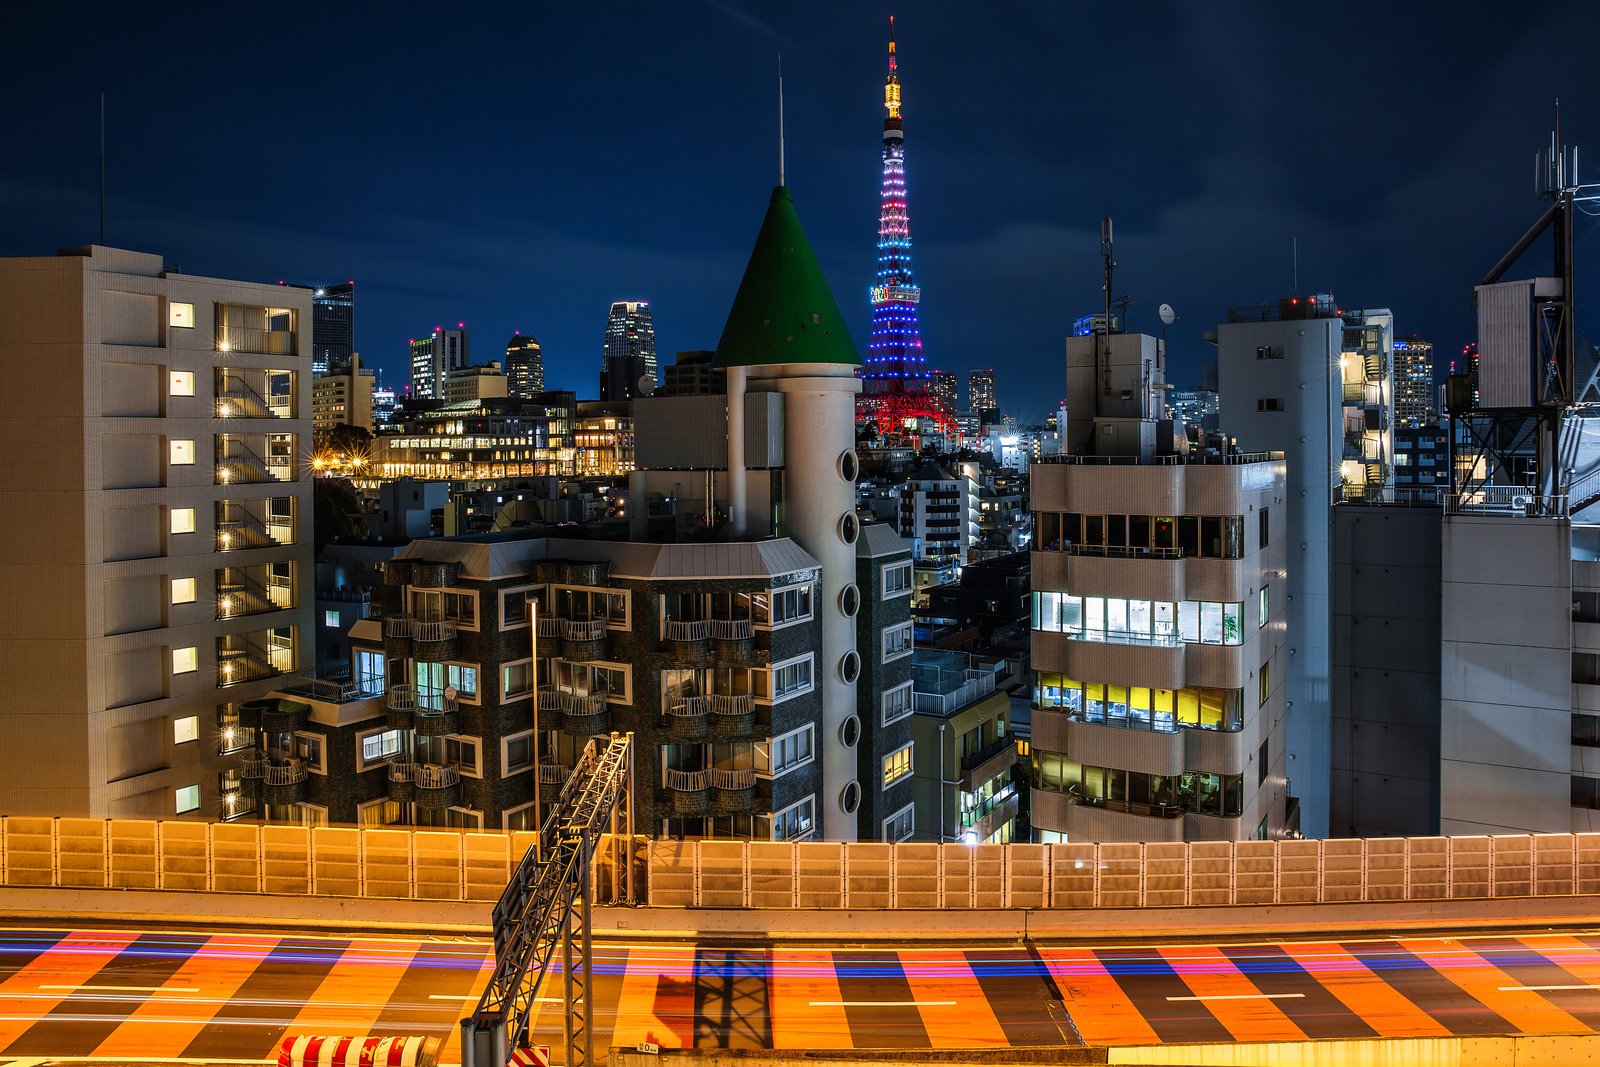 japan, Japon, Architecture, Bridges, Freeway, Building, Cities, Monuments, Night, Panorama, Panoramic, Rivers, Tower, Towers, Tokyo, Ray, Light Wallpaper